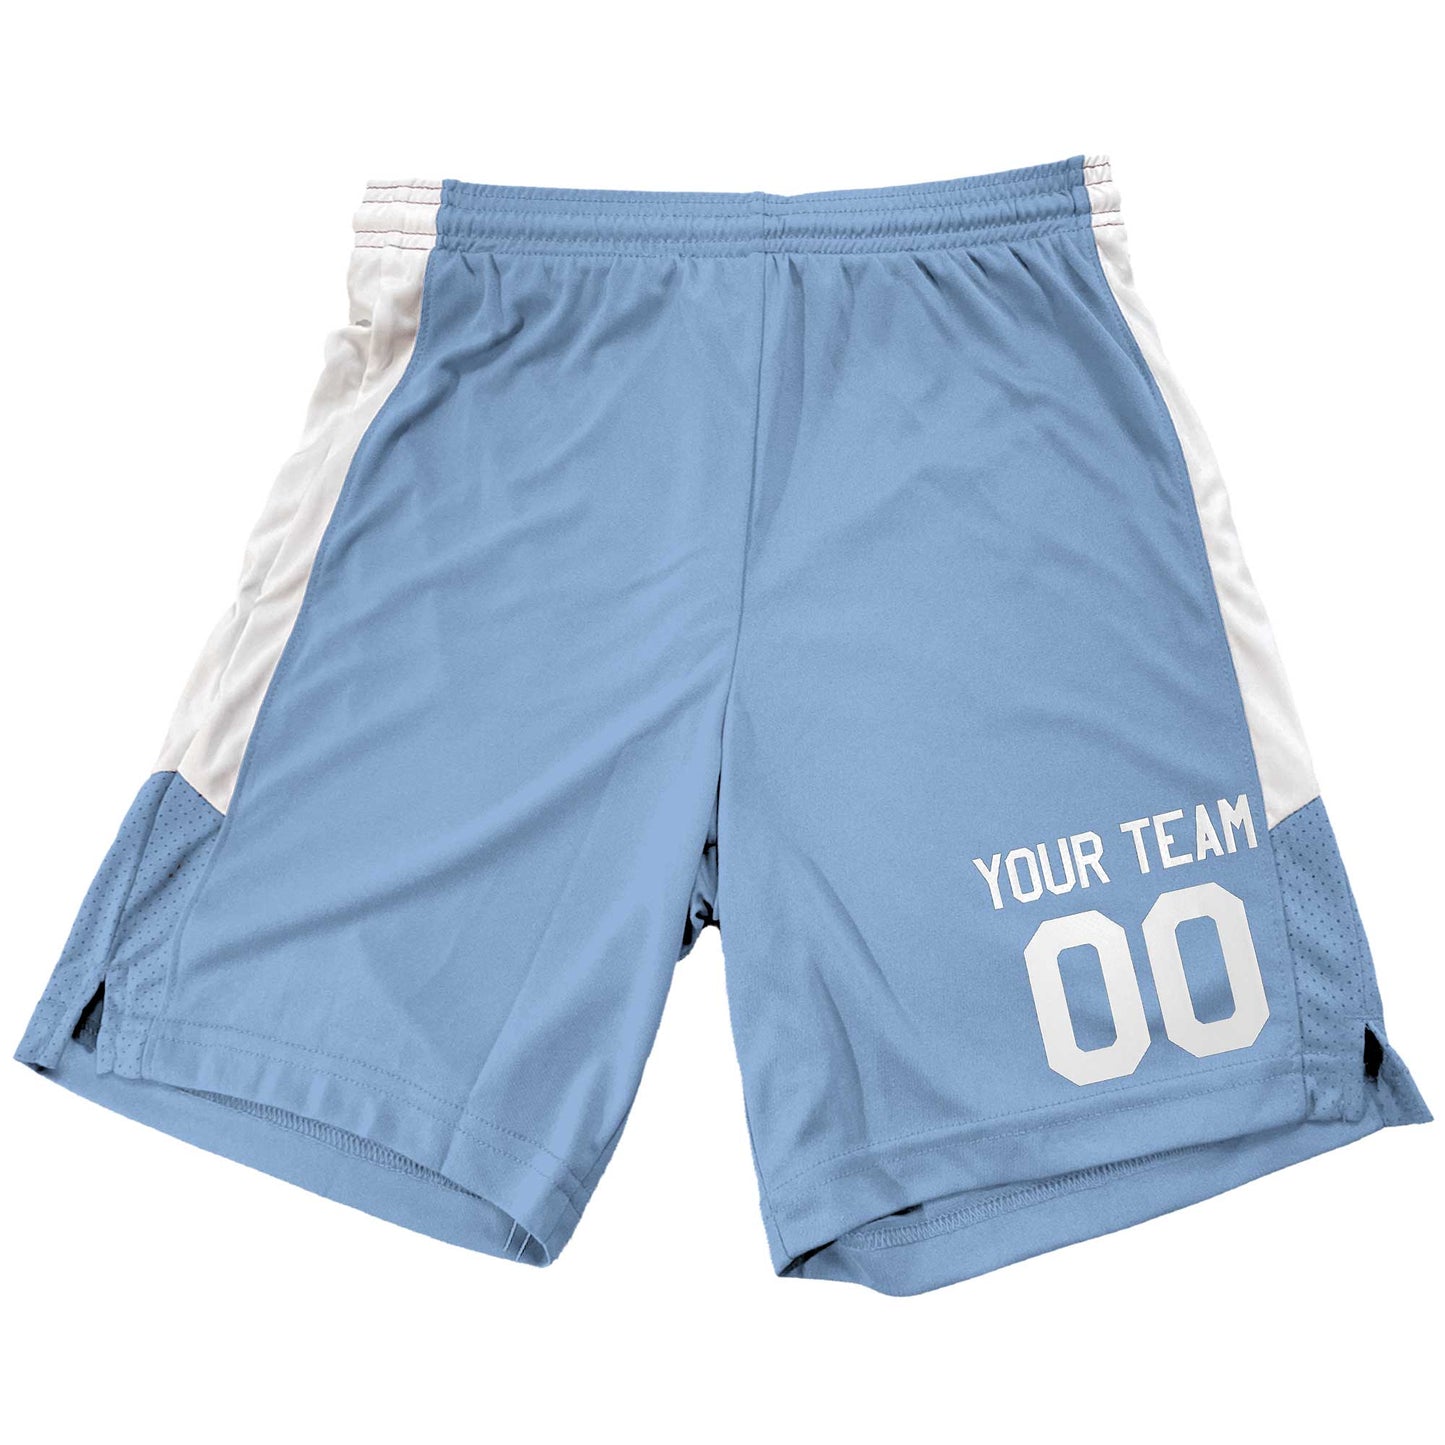 Youth Custom Basketball Shorts for Boys and Girls, Contrast Mesh Side Panel, Customized Name and Left Leg Number, Matching Jersey Available